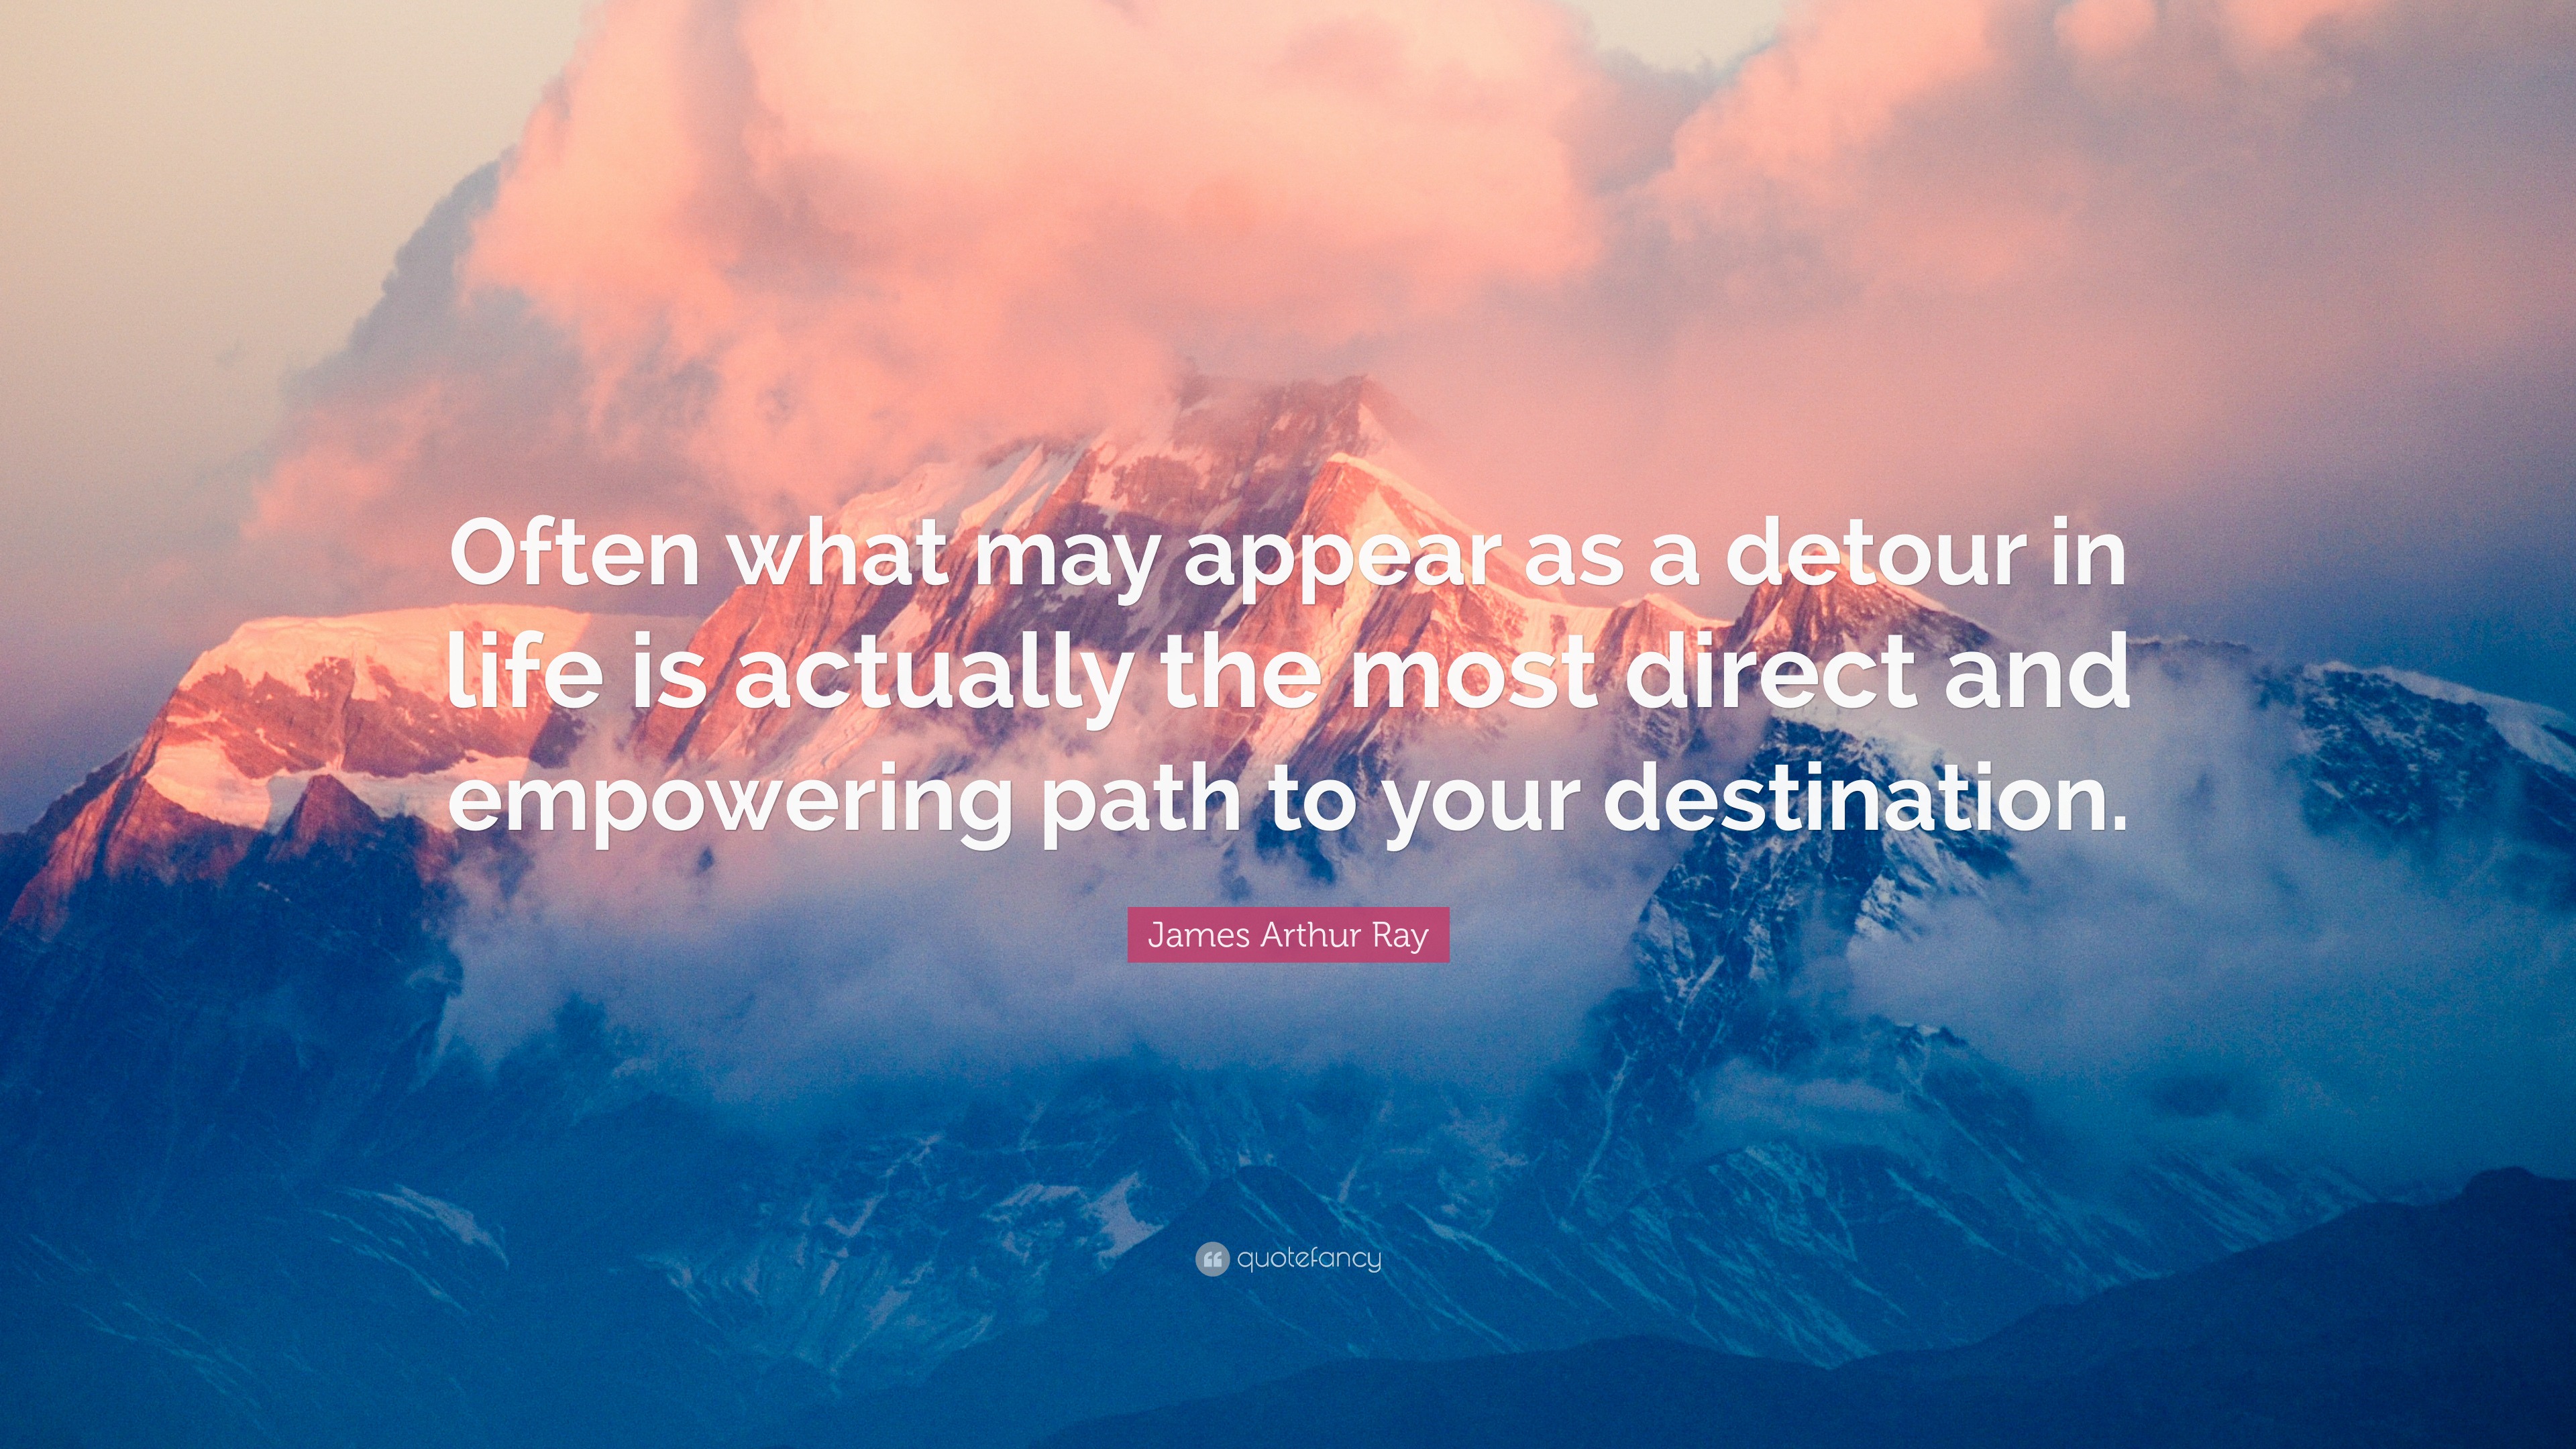 James Arthur Ray Quote: “Often what may appear as a detour in life is ...